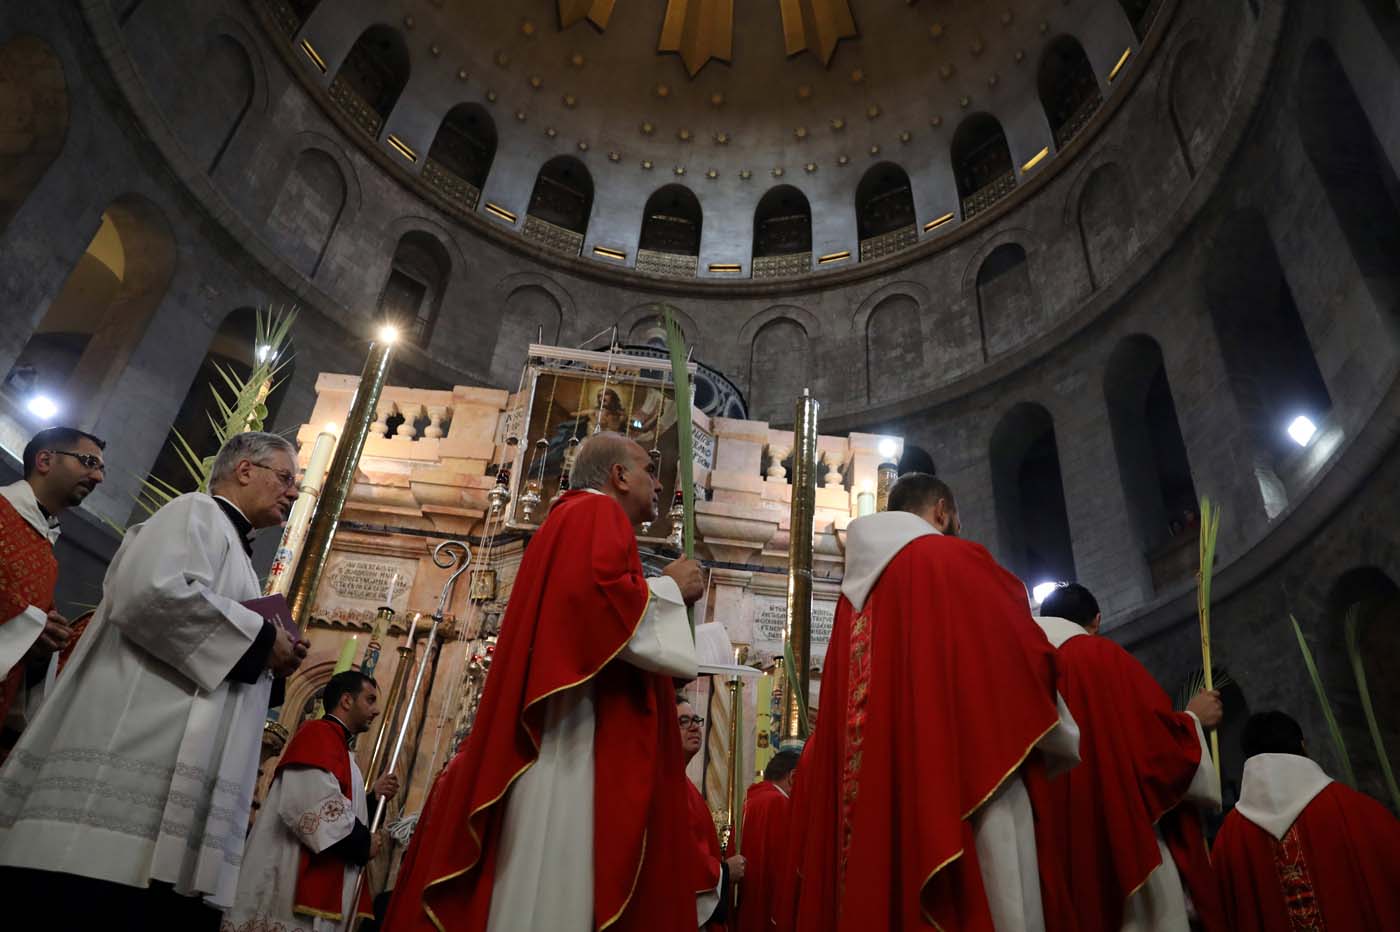 Members of the Catholic Christian clergy take part in a Palm Sunday ceremony in the Church of the Holy Sepulchre in Jerusalem's Old City April 9, 2017. REUTERS/Ammar Awad